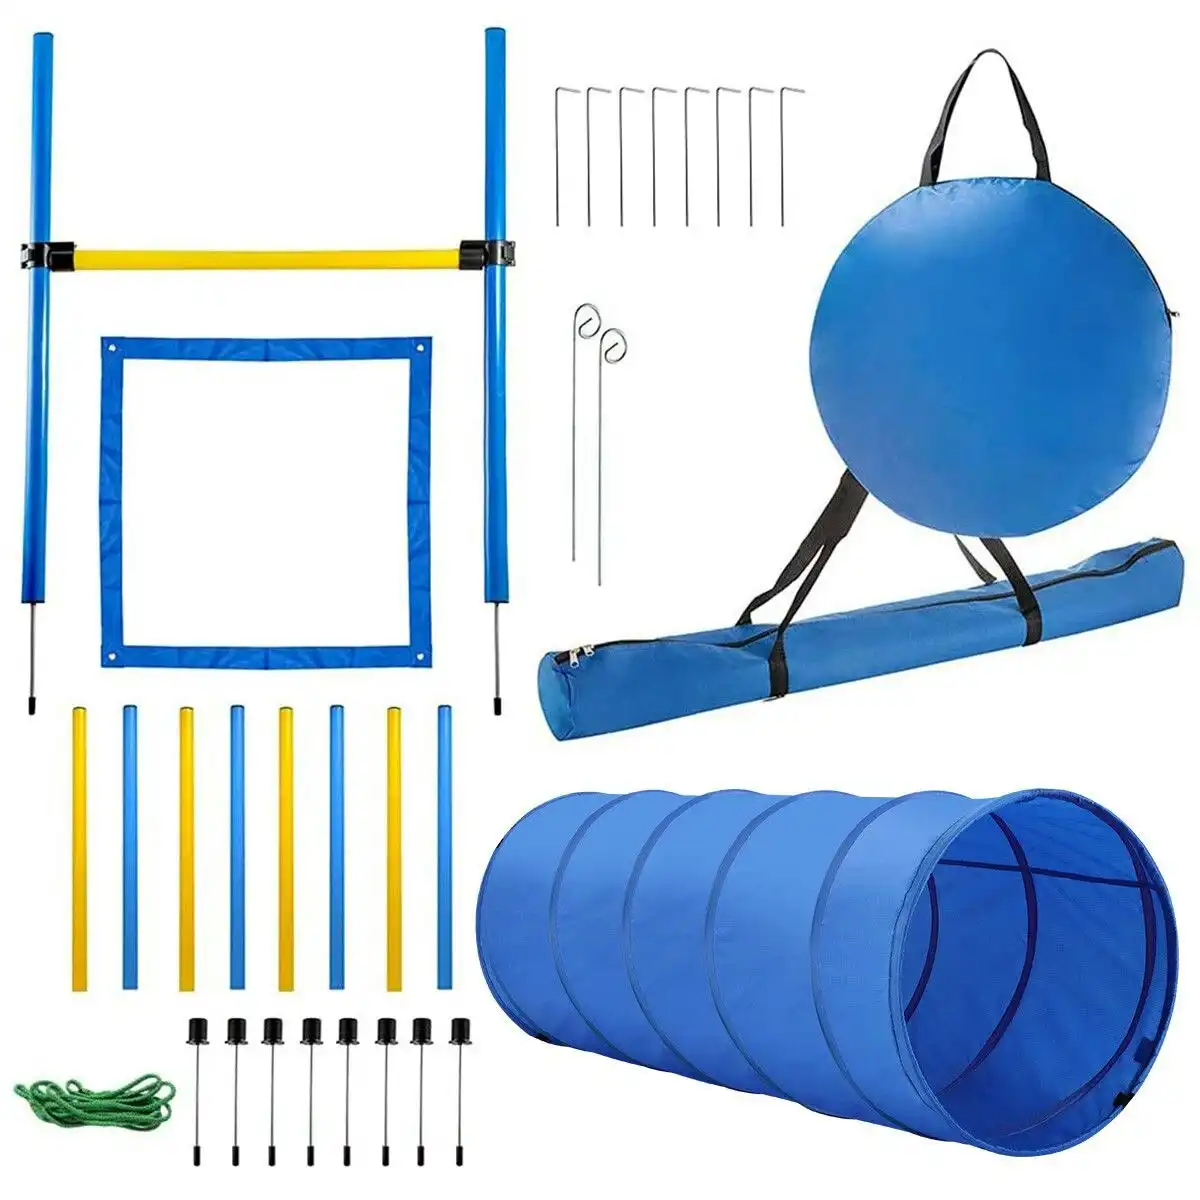 Ausway Pawise Dog Agility Equipment Set 28 PCS Pet Obstacle Training Course Tunnel Poles Pause Box Carrying Bags